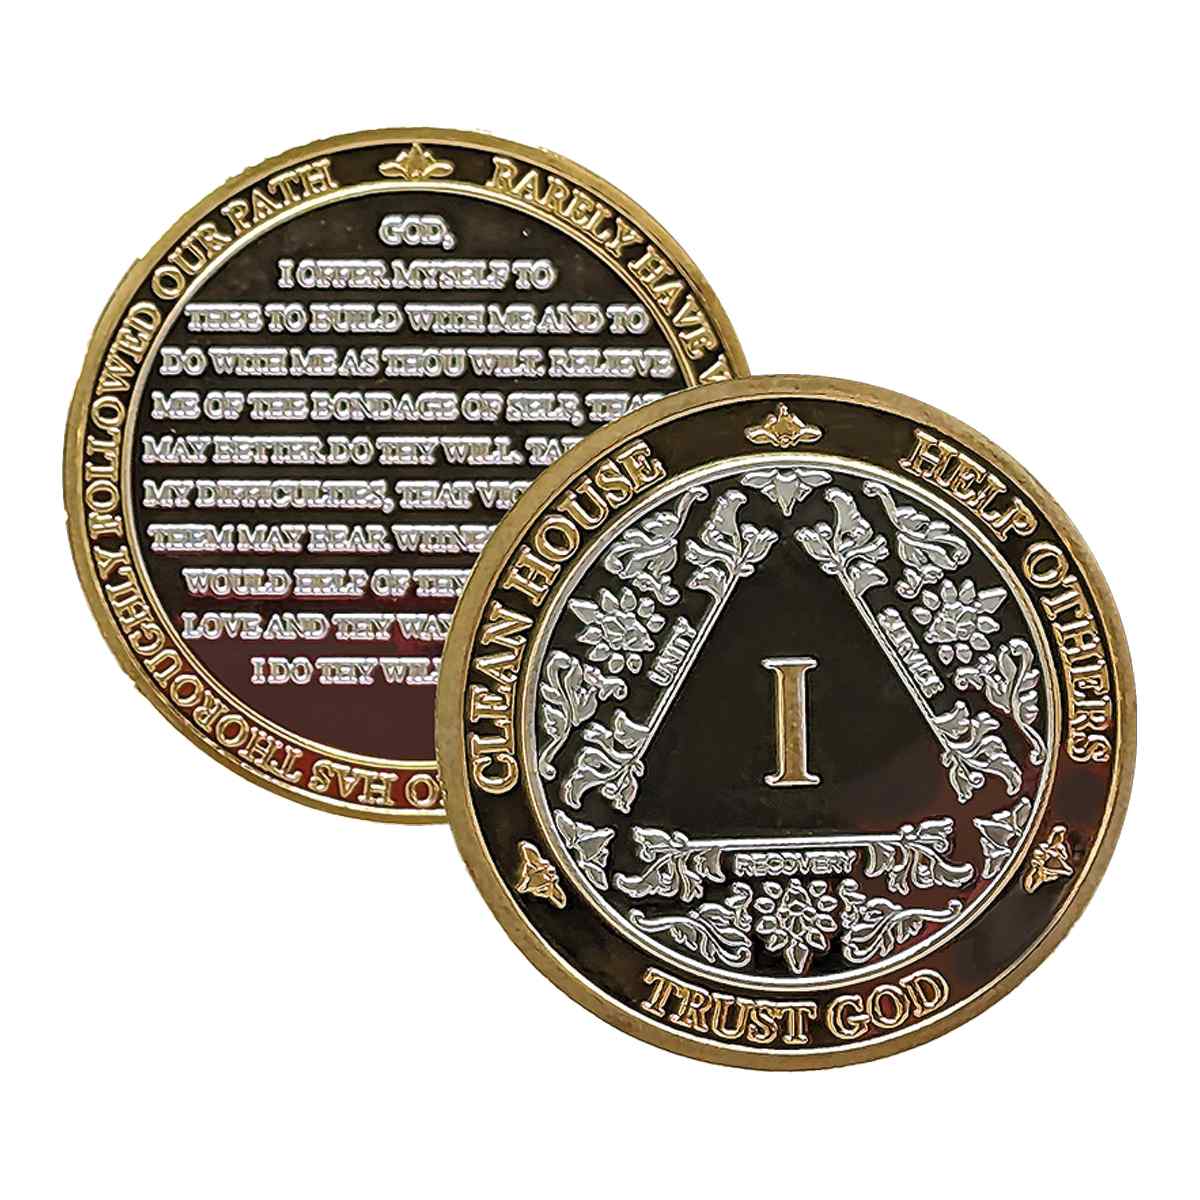 Silver & Gold AA Coin 1-60yrs Sobriety Chip